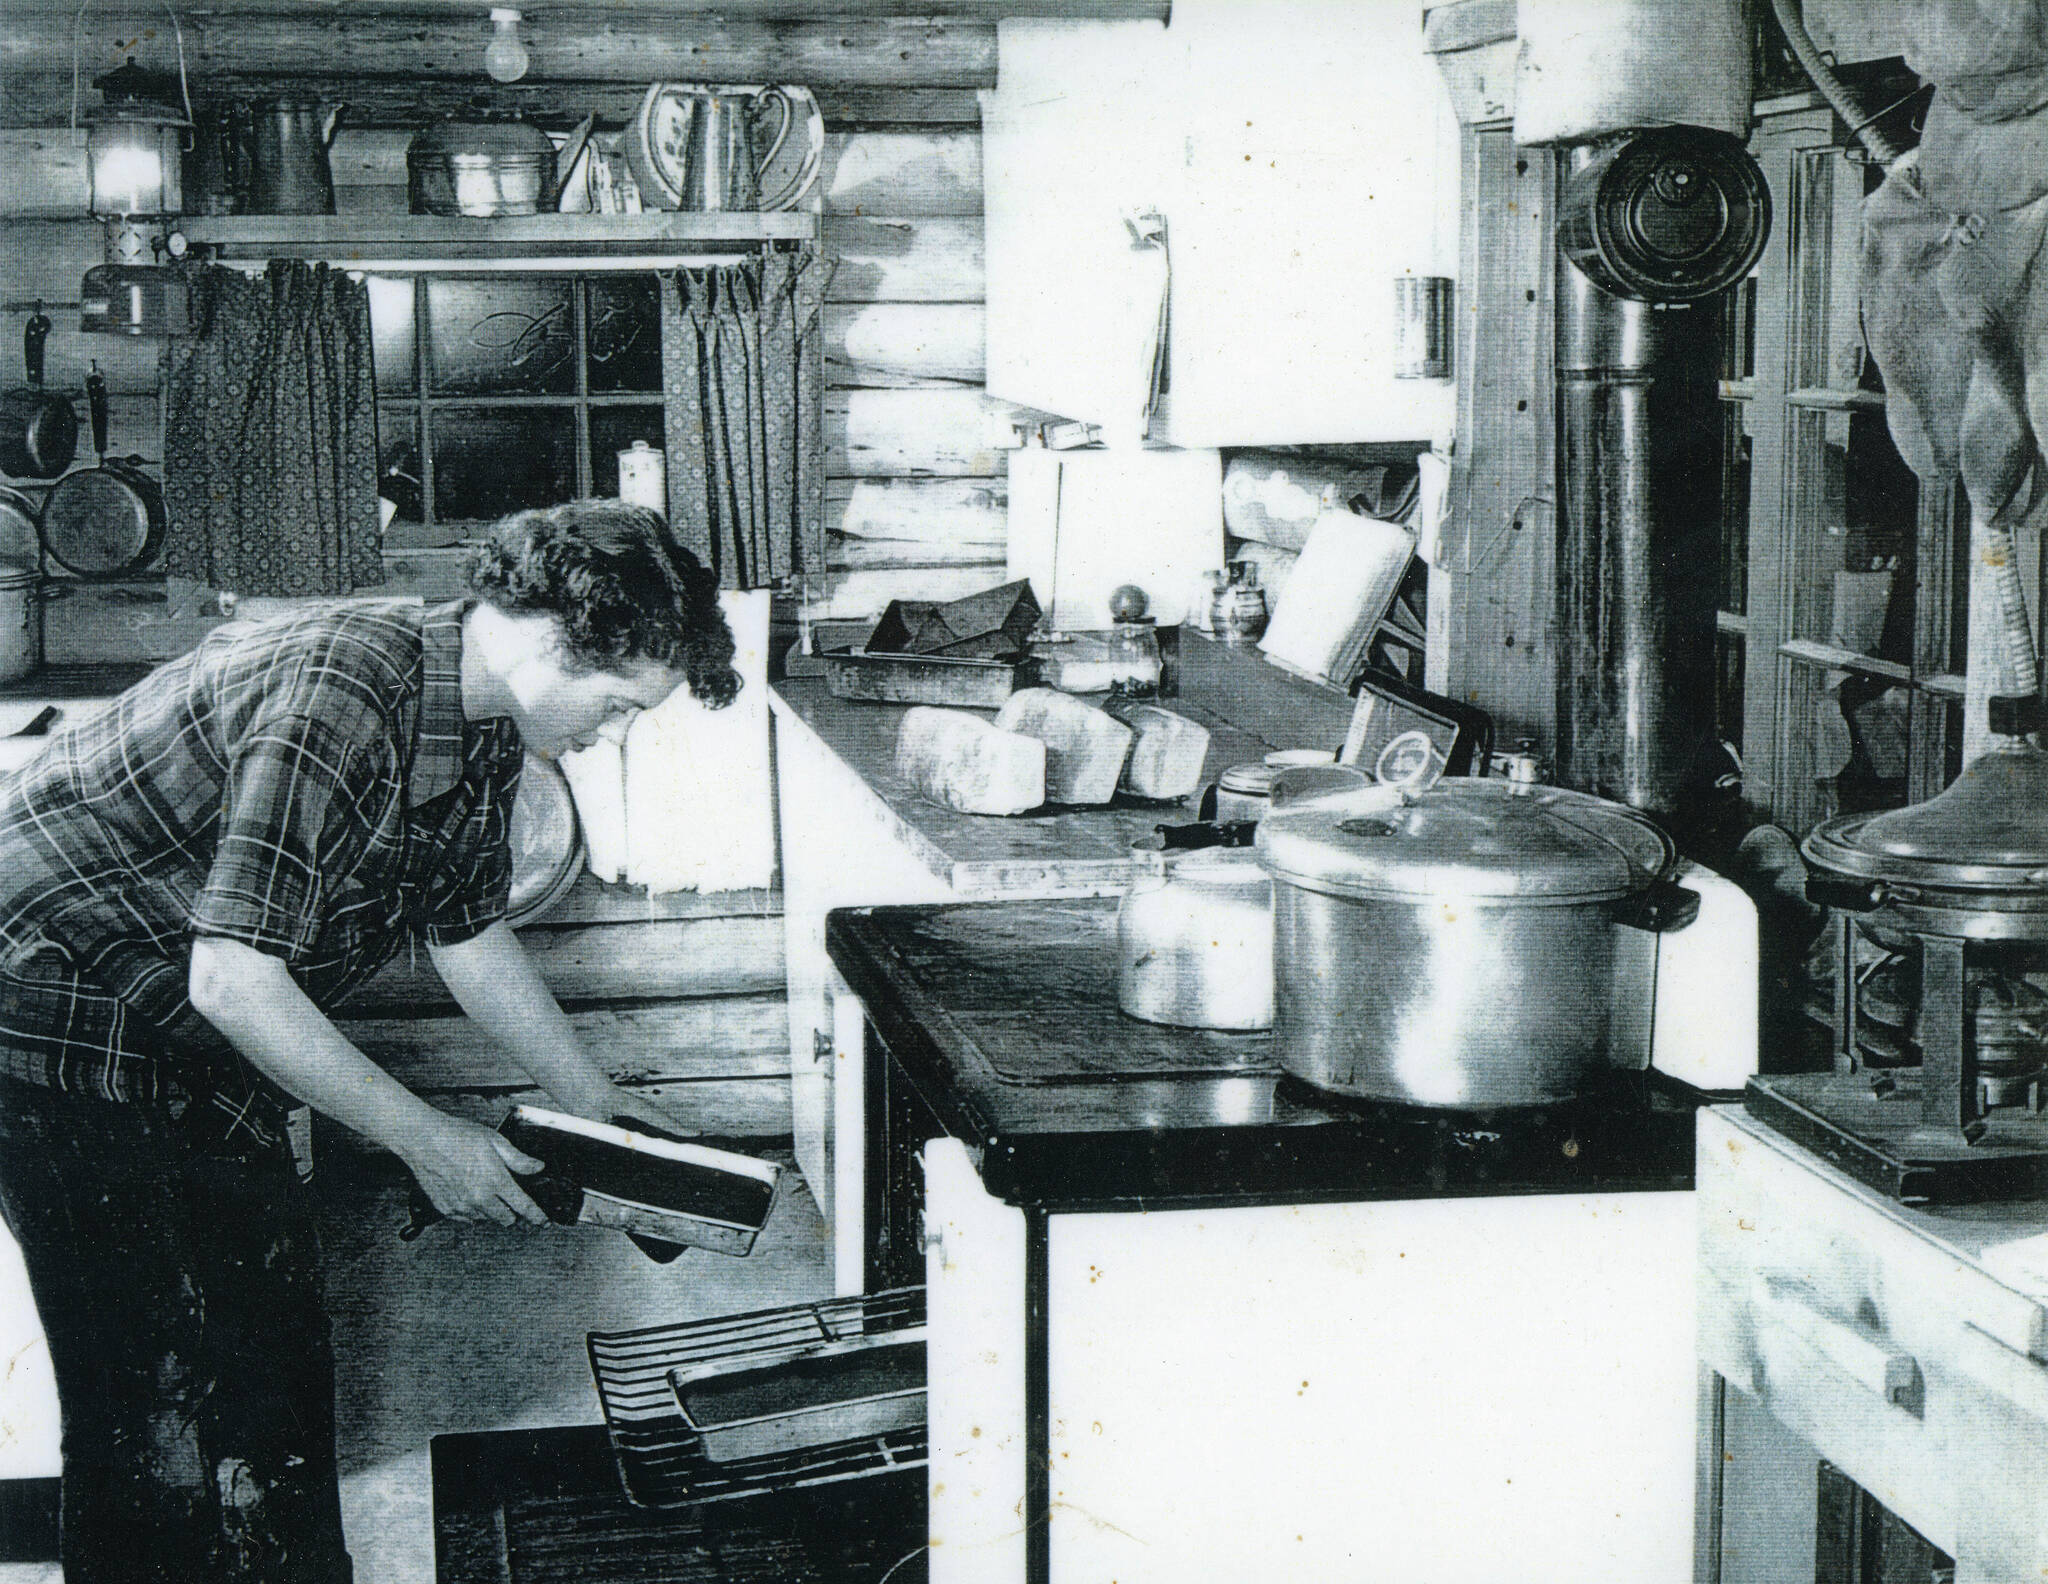 1954 photo by Bob and Ira Spring for Better Homes & Garden magazine
Rusty Lancashire does some baking.